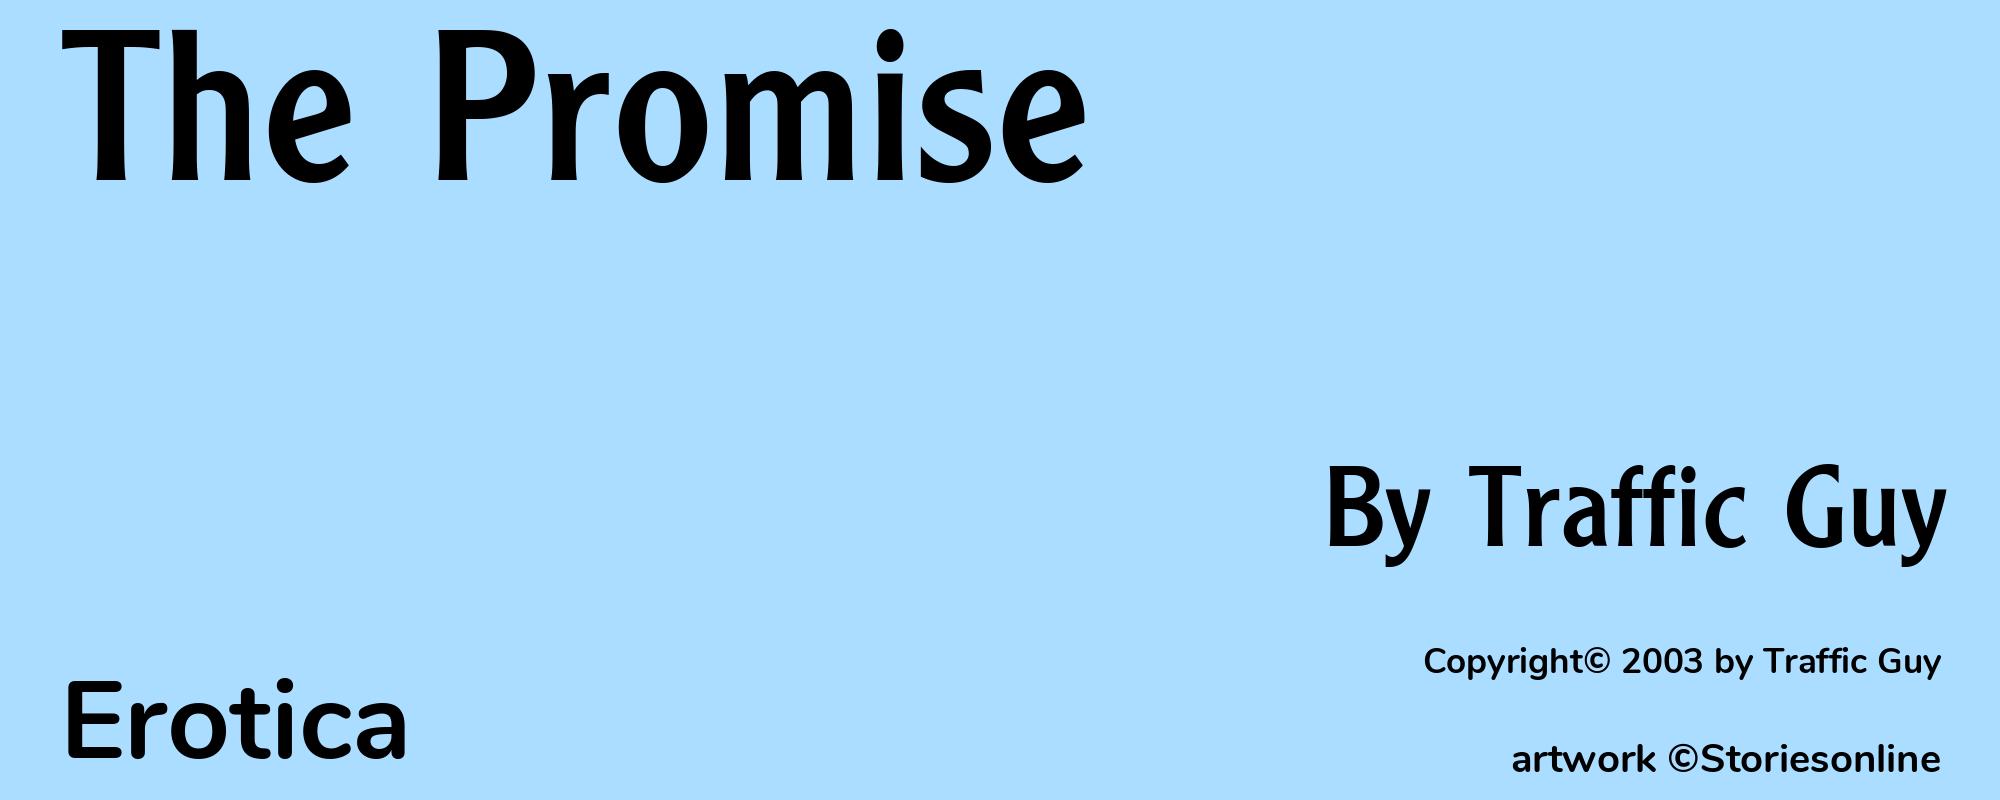 The Promise - Cover